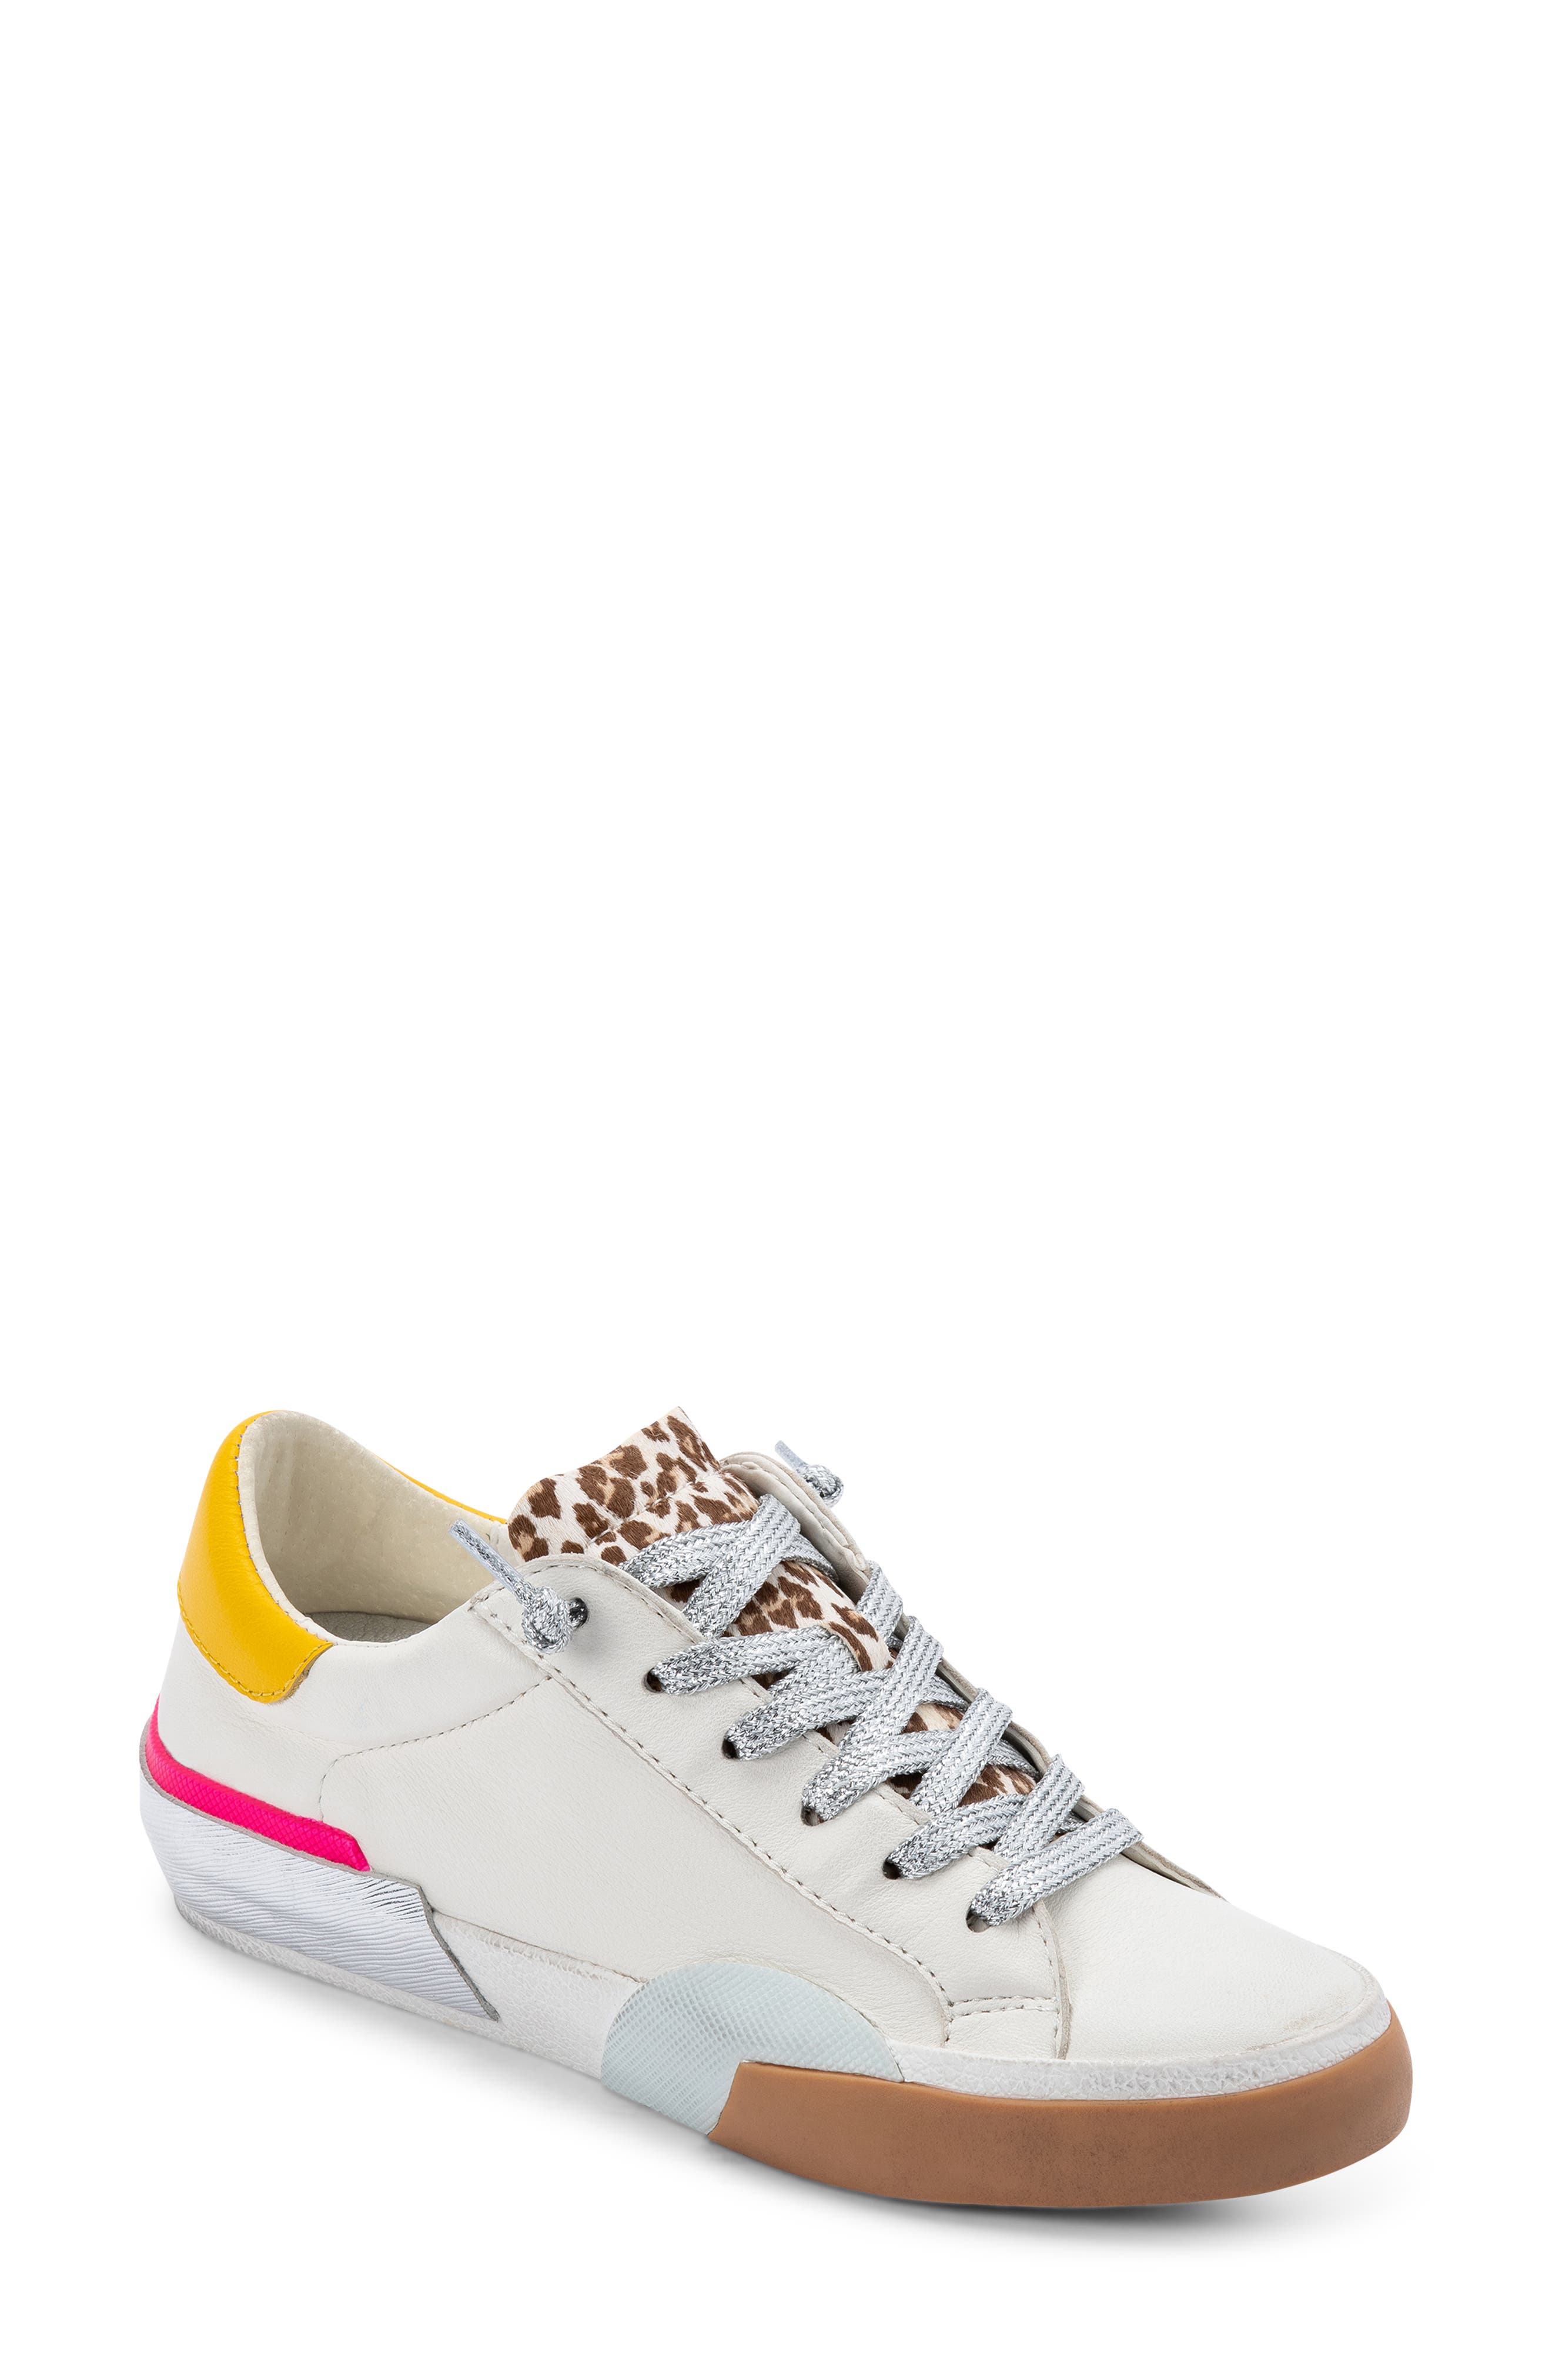 Dolce Vita Women's Zina Low Top Sneakers In White Multi Leather